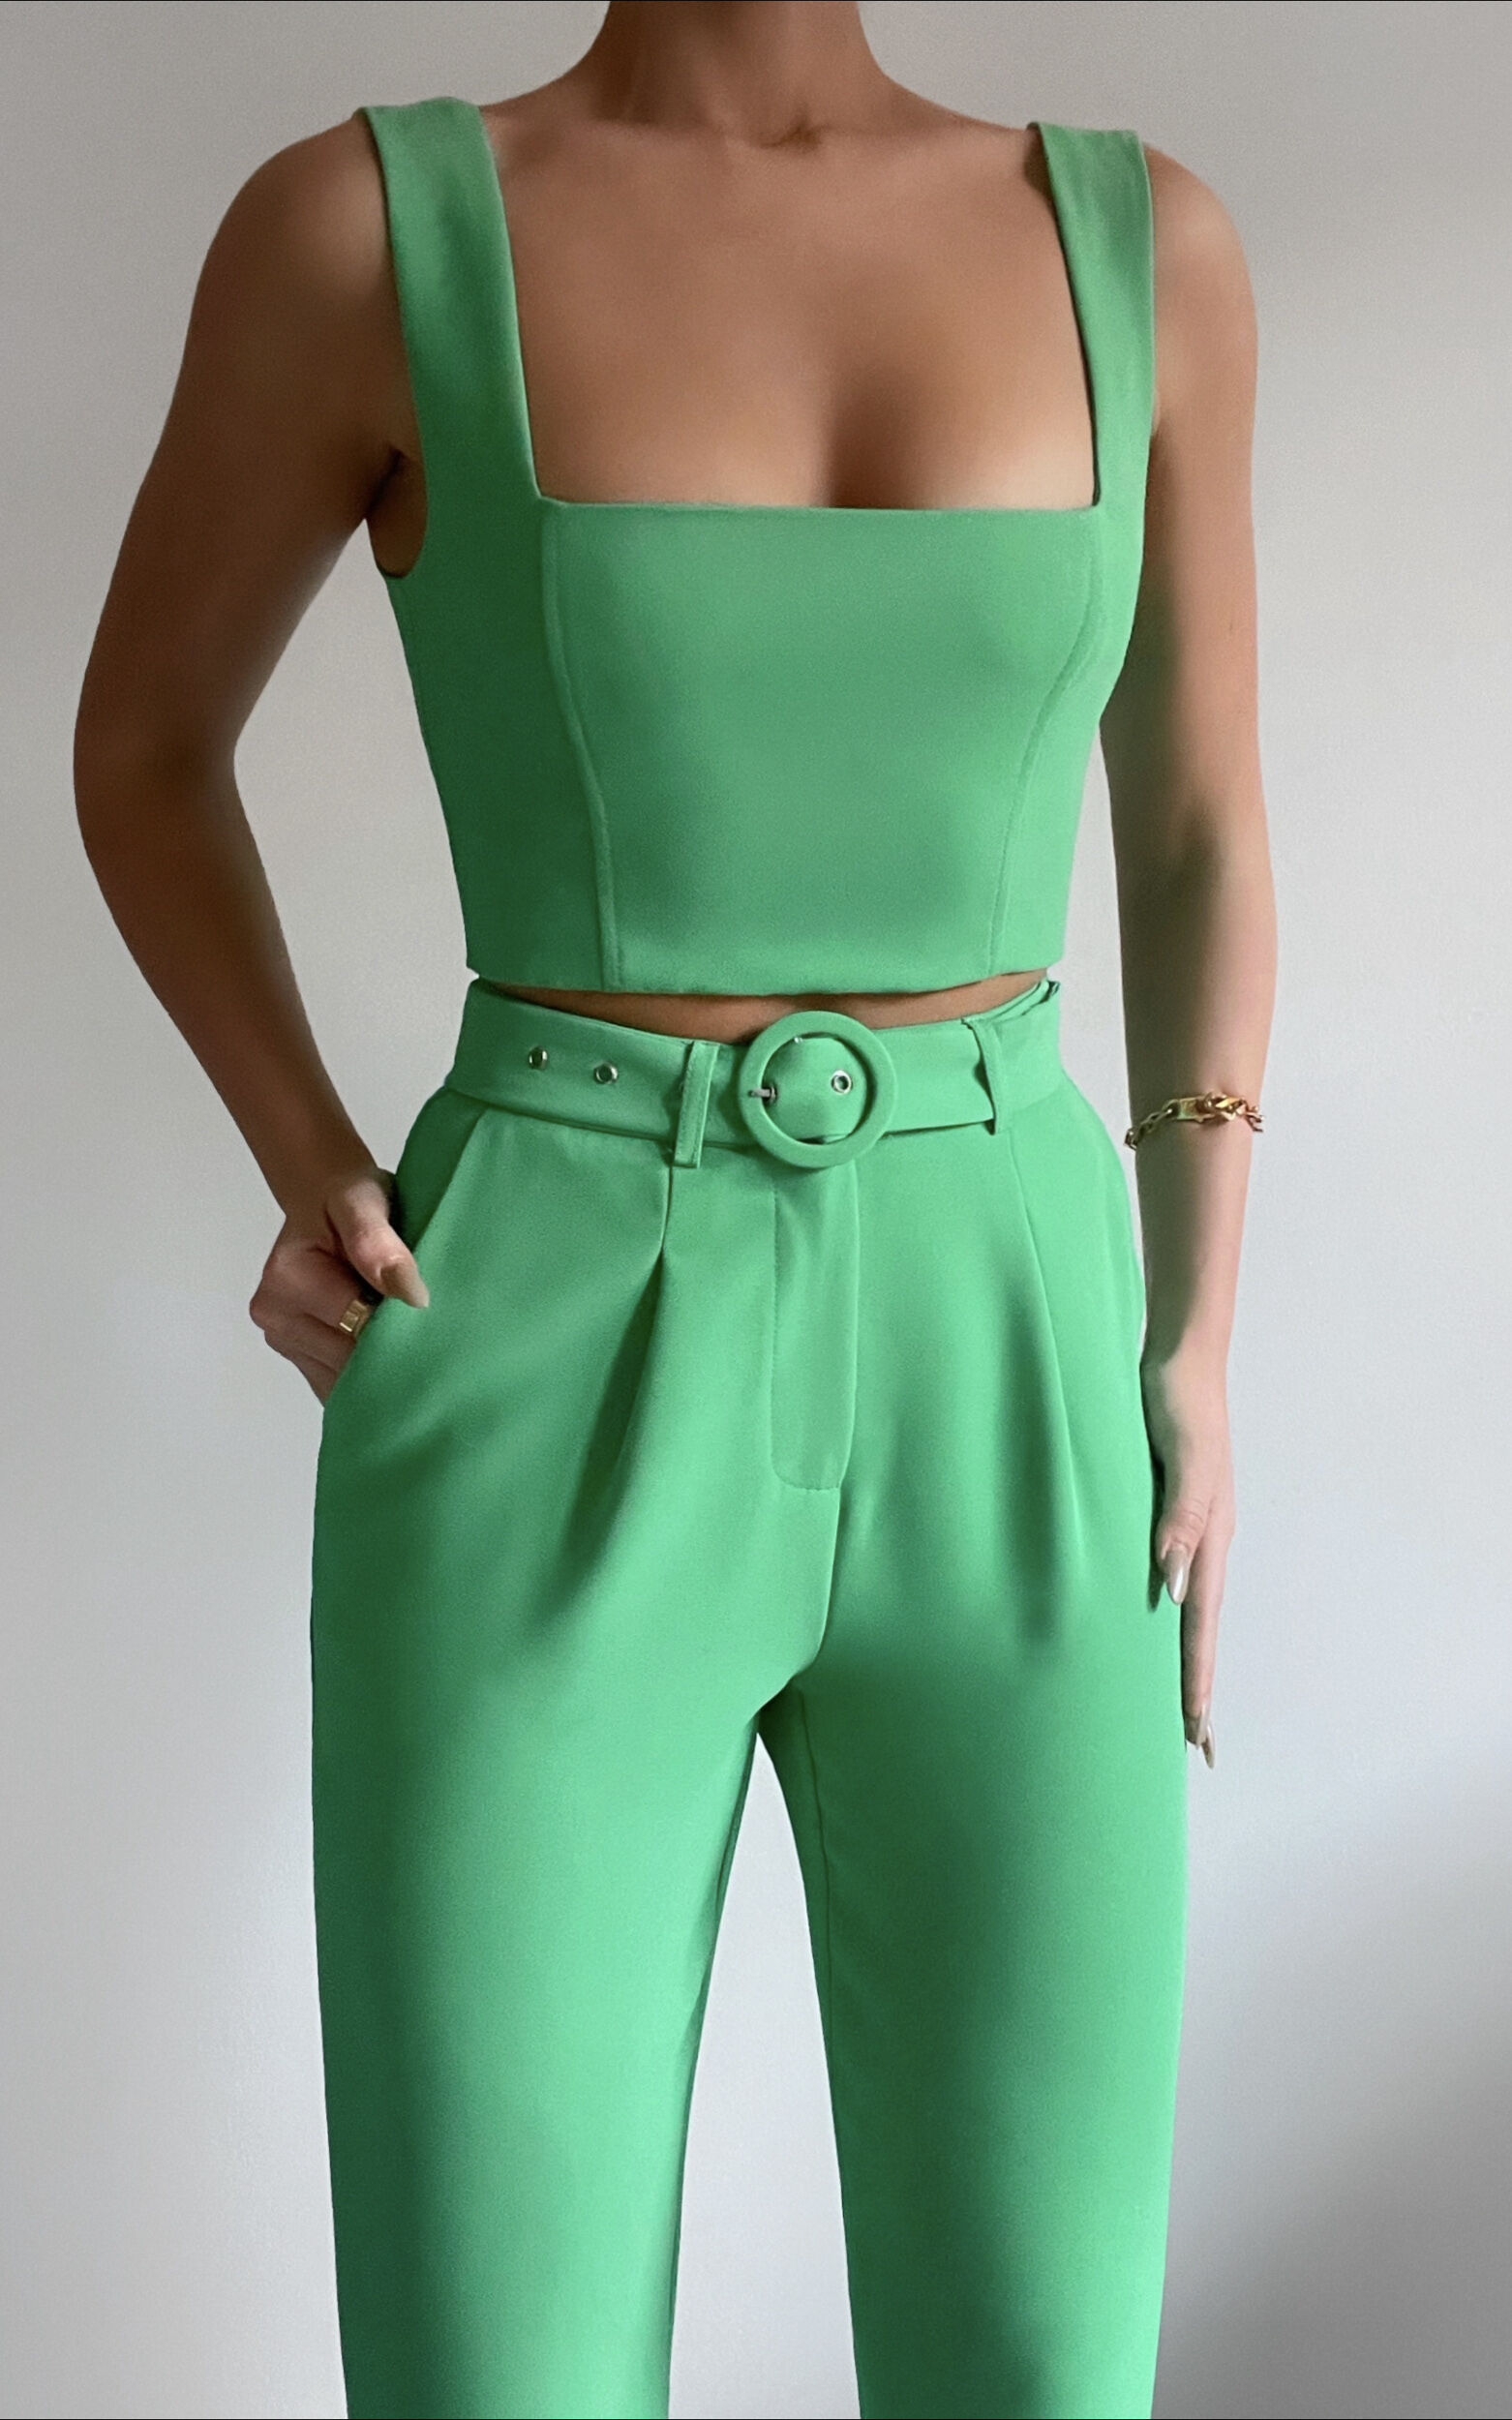 Reyna Two Piece Set - Crop Top and Tailored Pants in Green - 04, GRN1, super-hi-res image number null